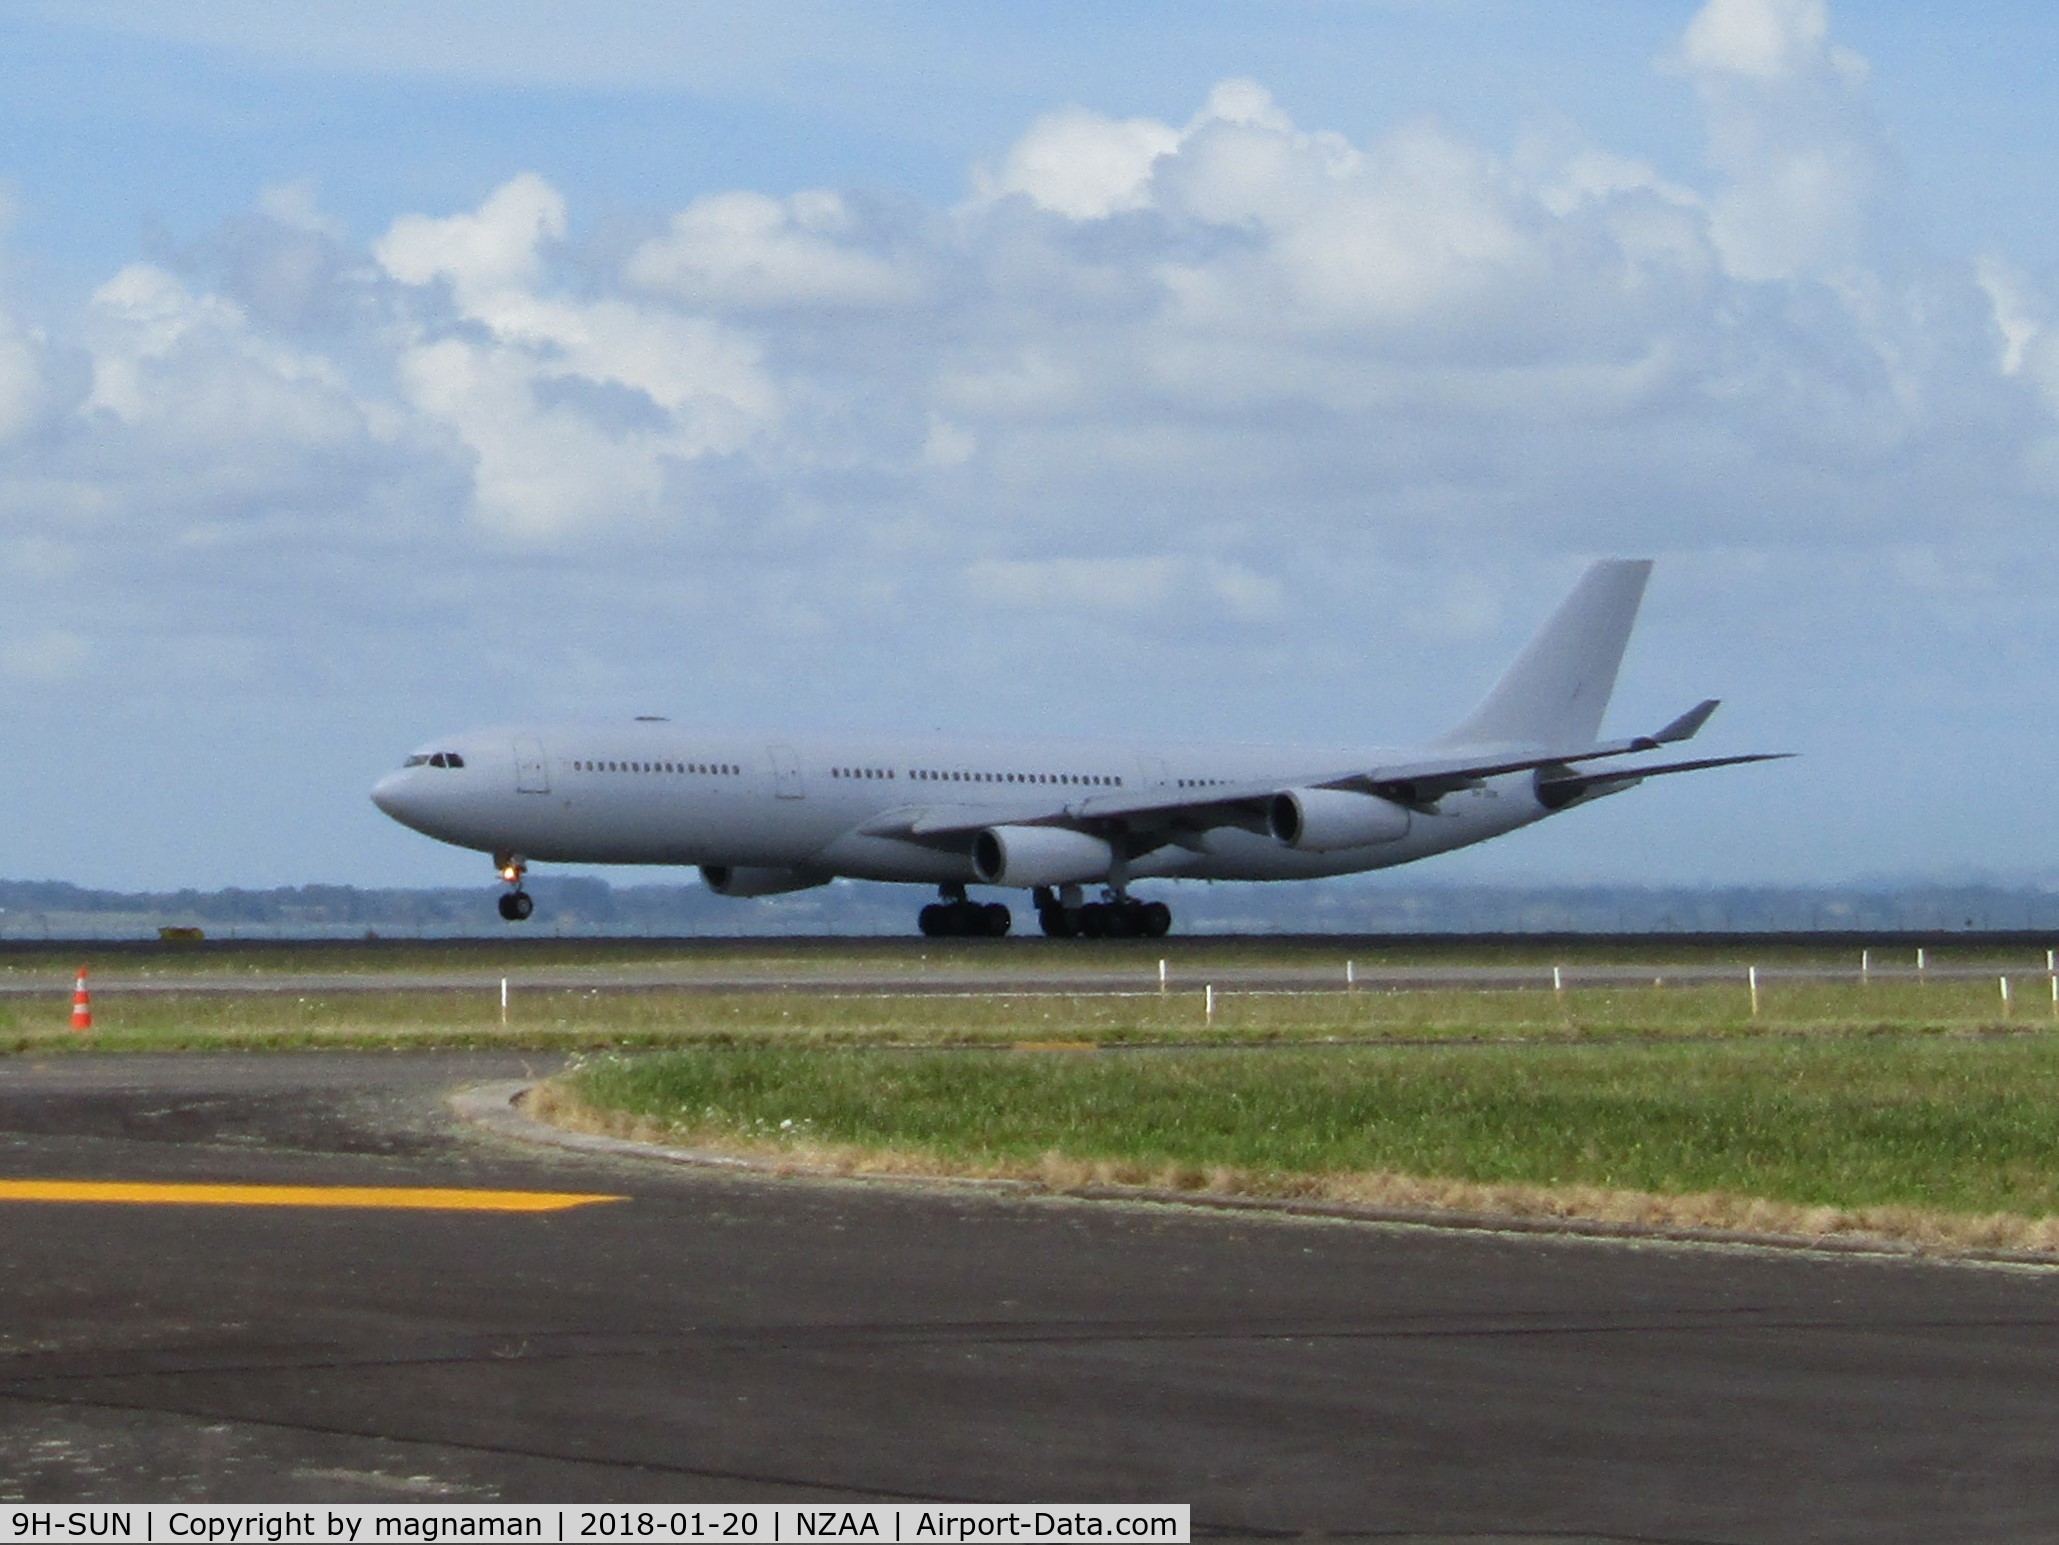 9H-SUN, 2000 Airbus A340-313X C/N 367, on lease to air NZ during dreamliner defects repairs